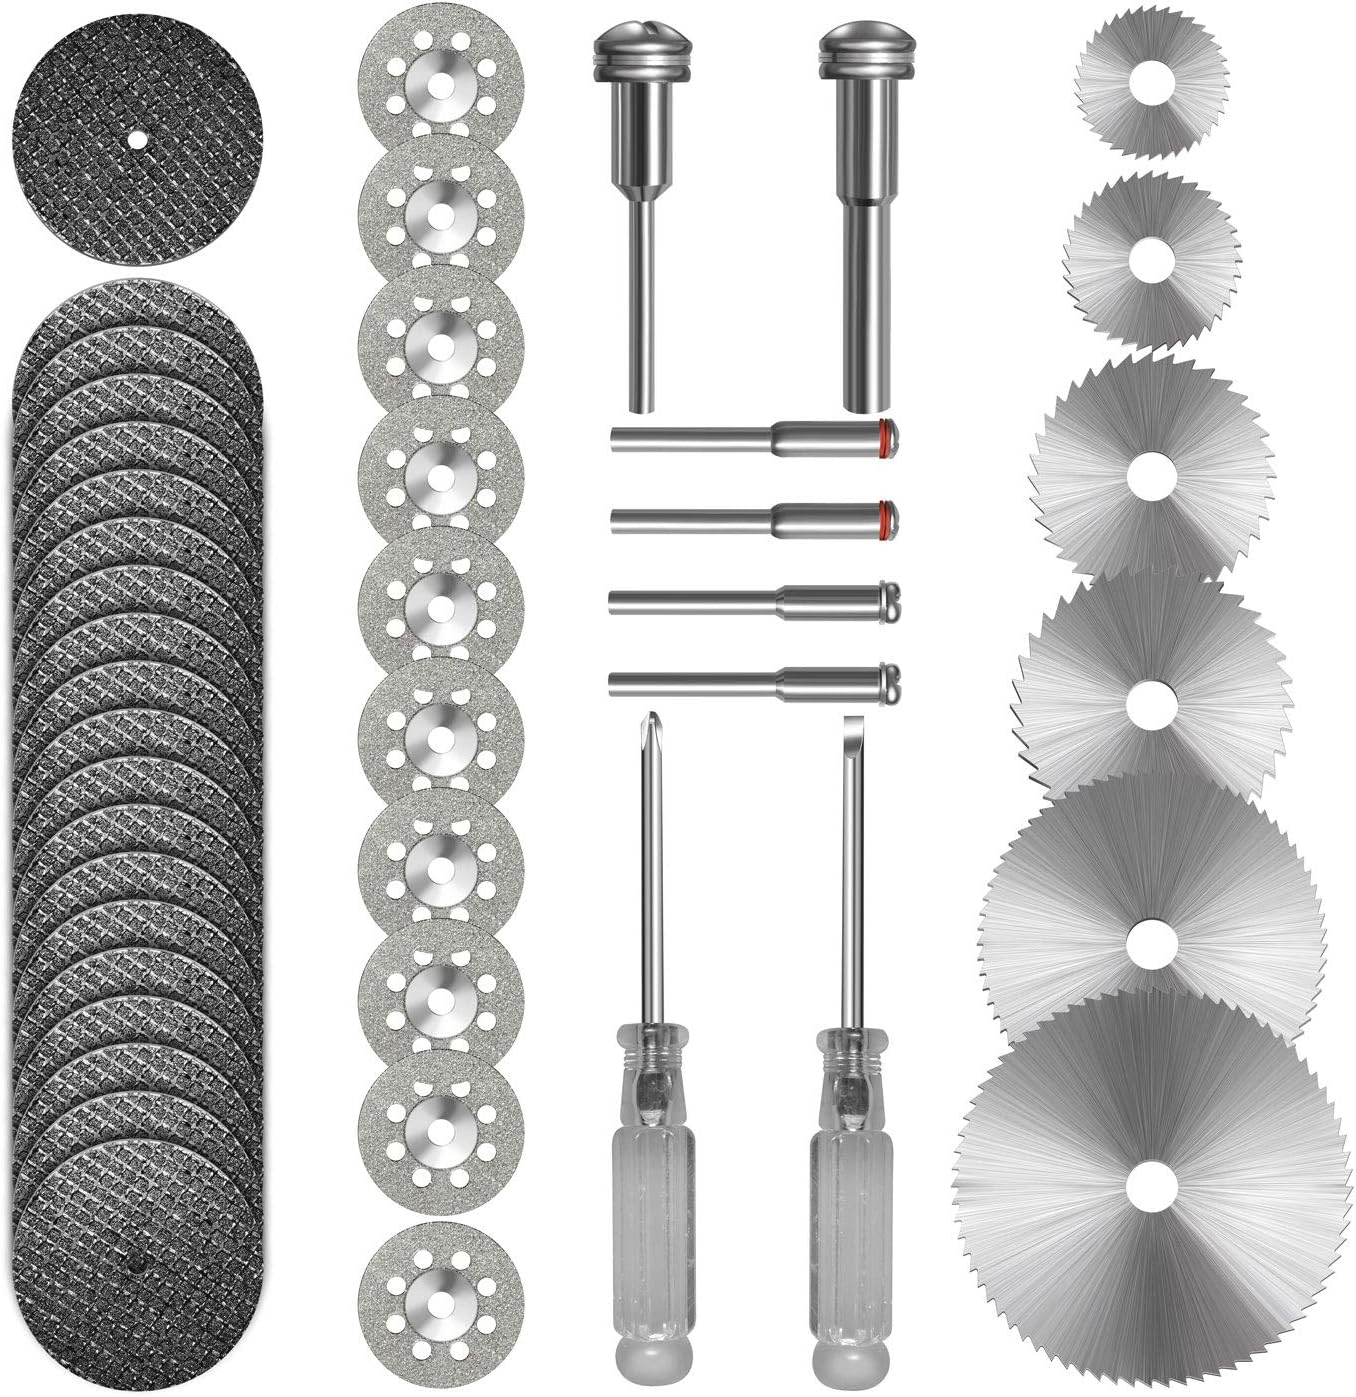 Kuenuilr Cutting Wheel Set Compatible with Plastic [...]